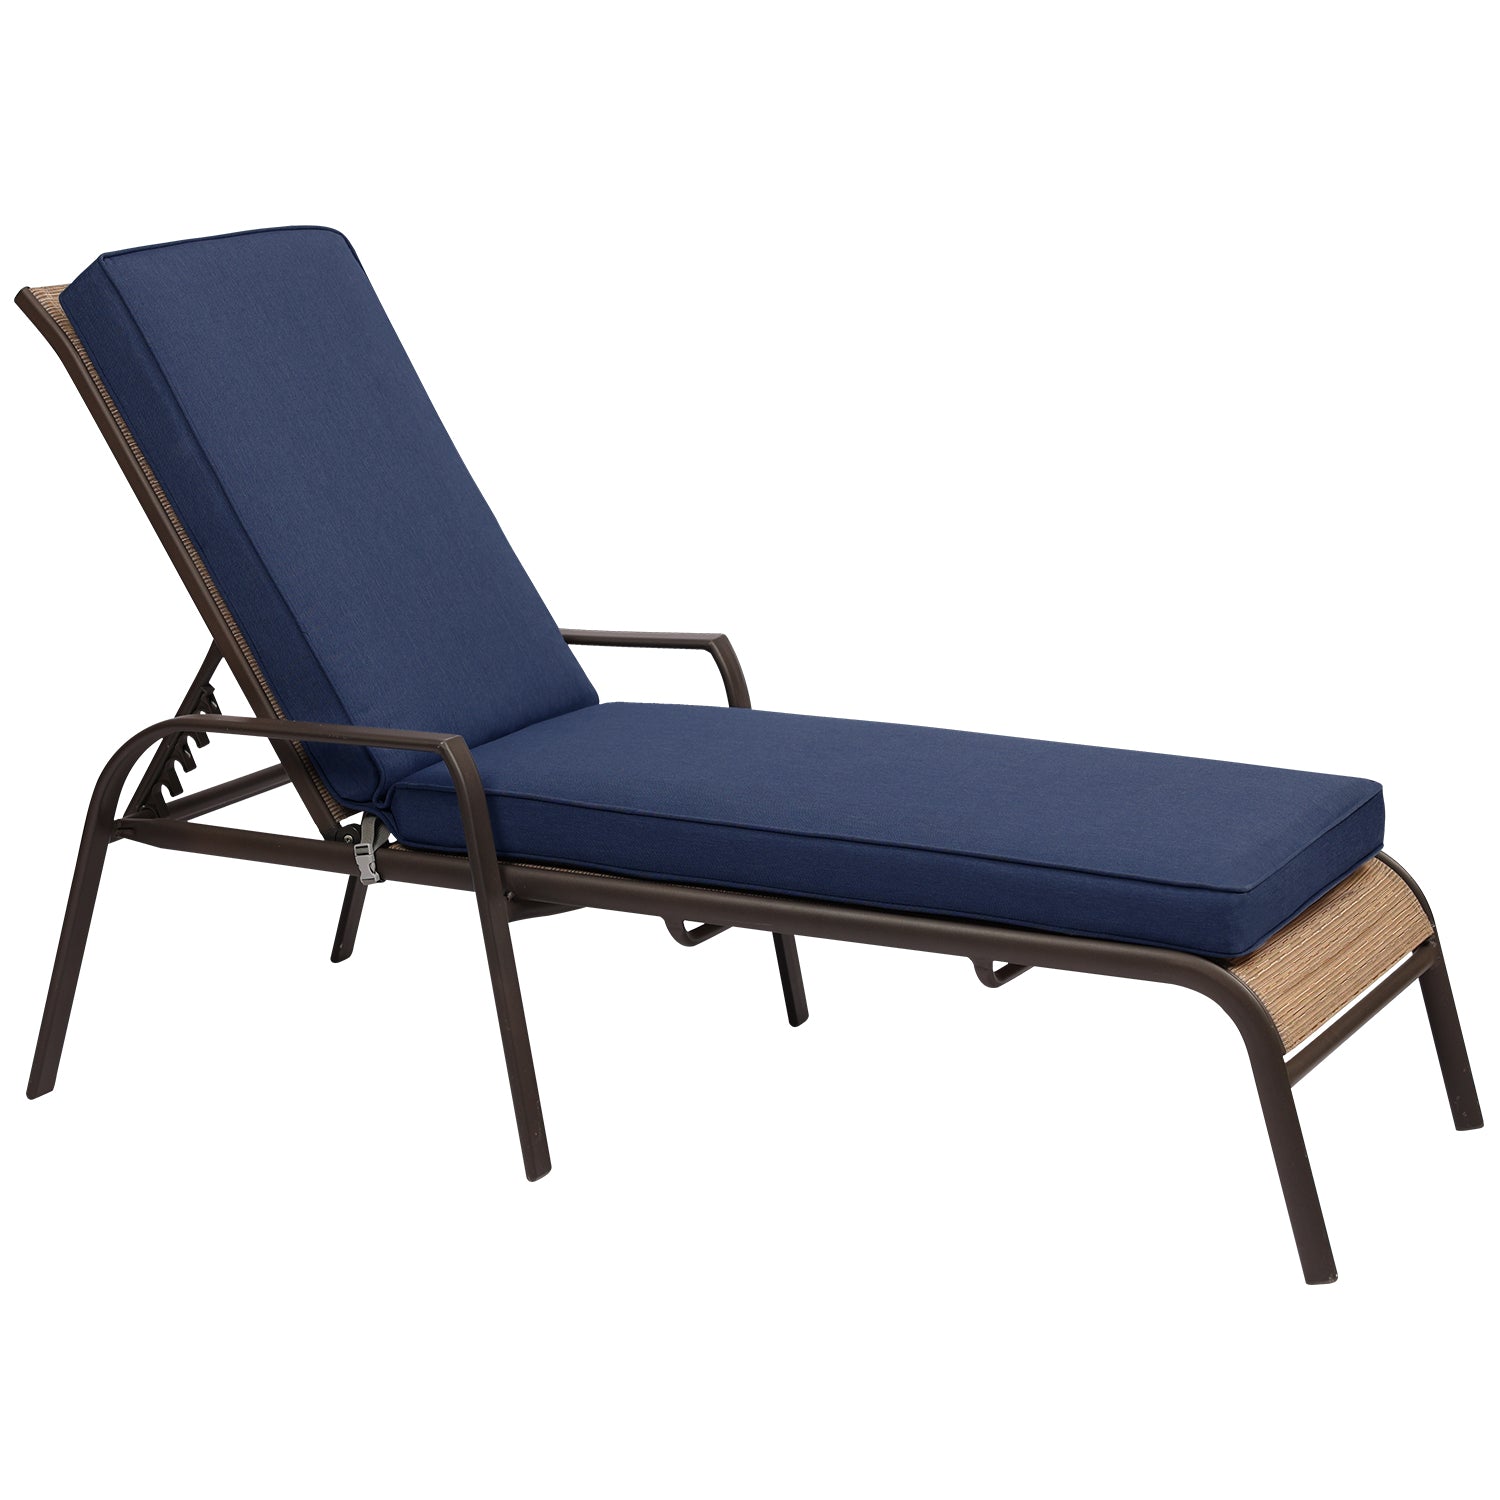 Patio Chaise Lounger Cushions Set of 2, Olefin Fabric, Water-Resistant, 72x21x3 Inches(Only Cushions) CUSHION Aoodor   